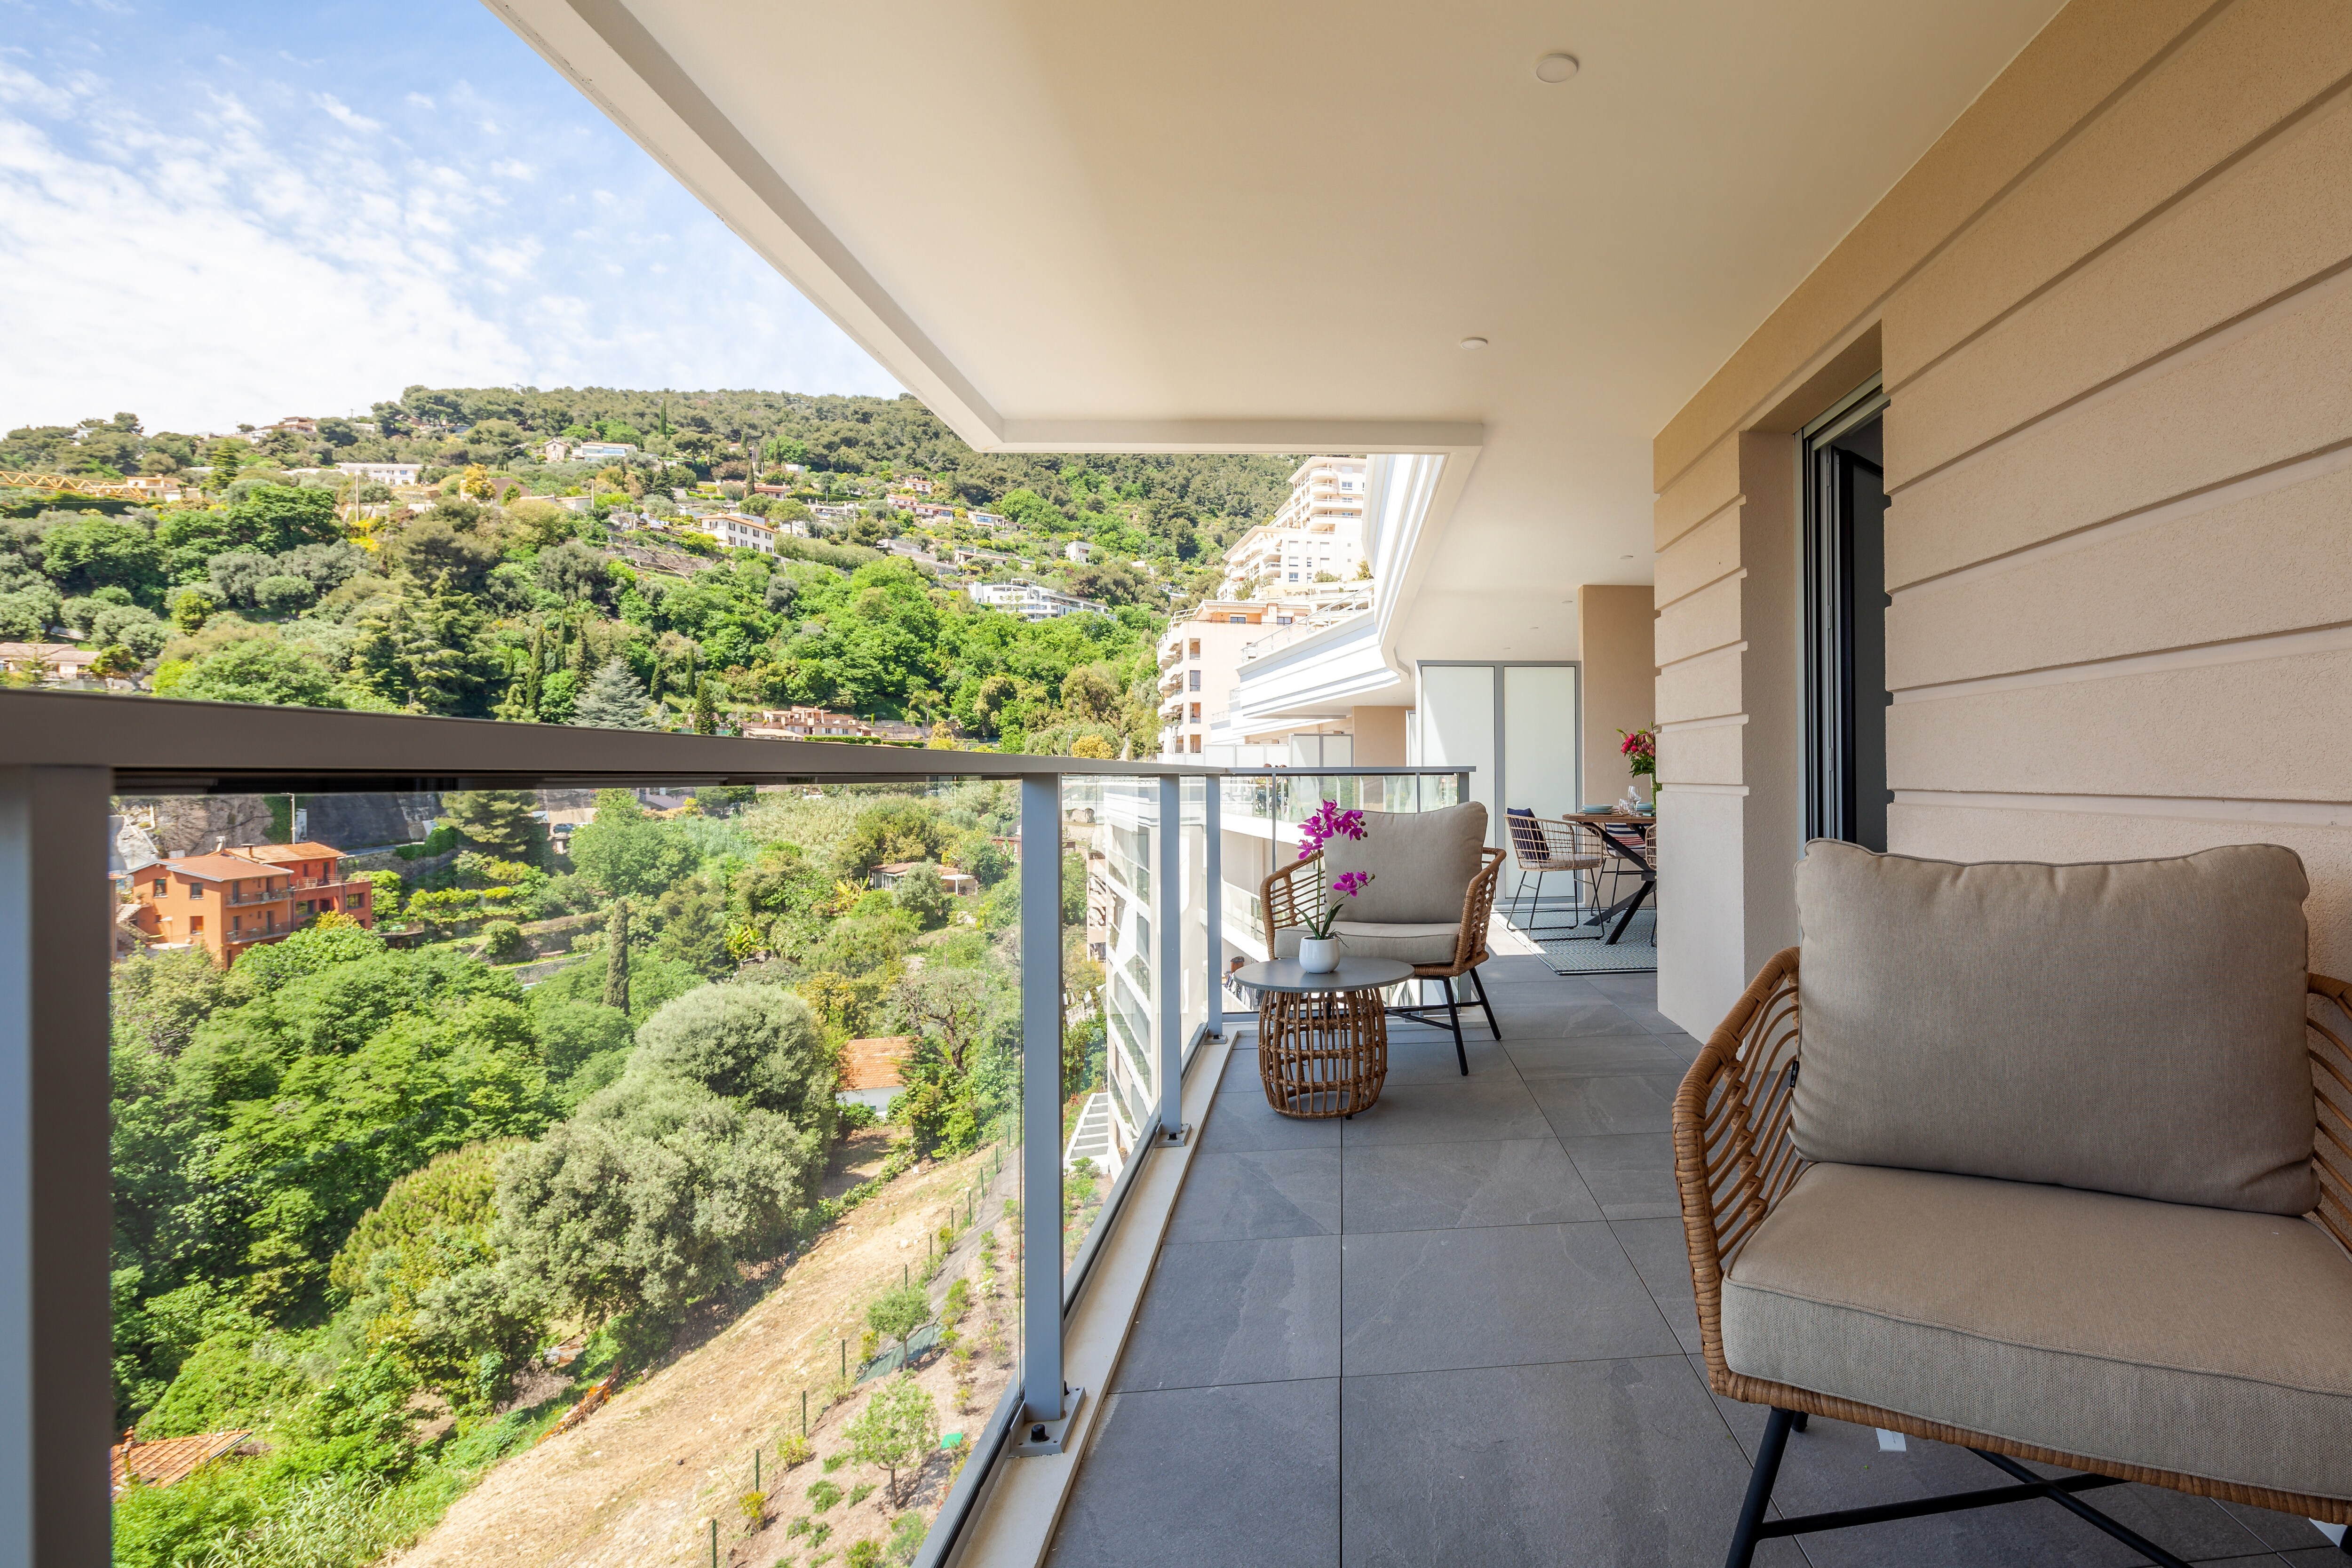 Property Image 2 - Enchanting two bedroom flat with balcony and view over the bay of Monaco